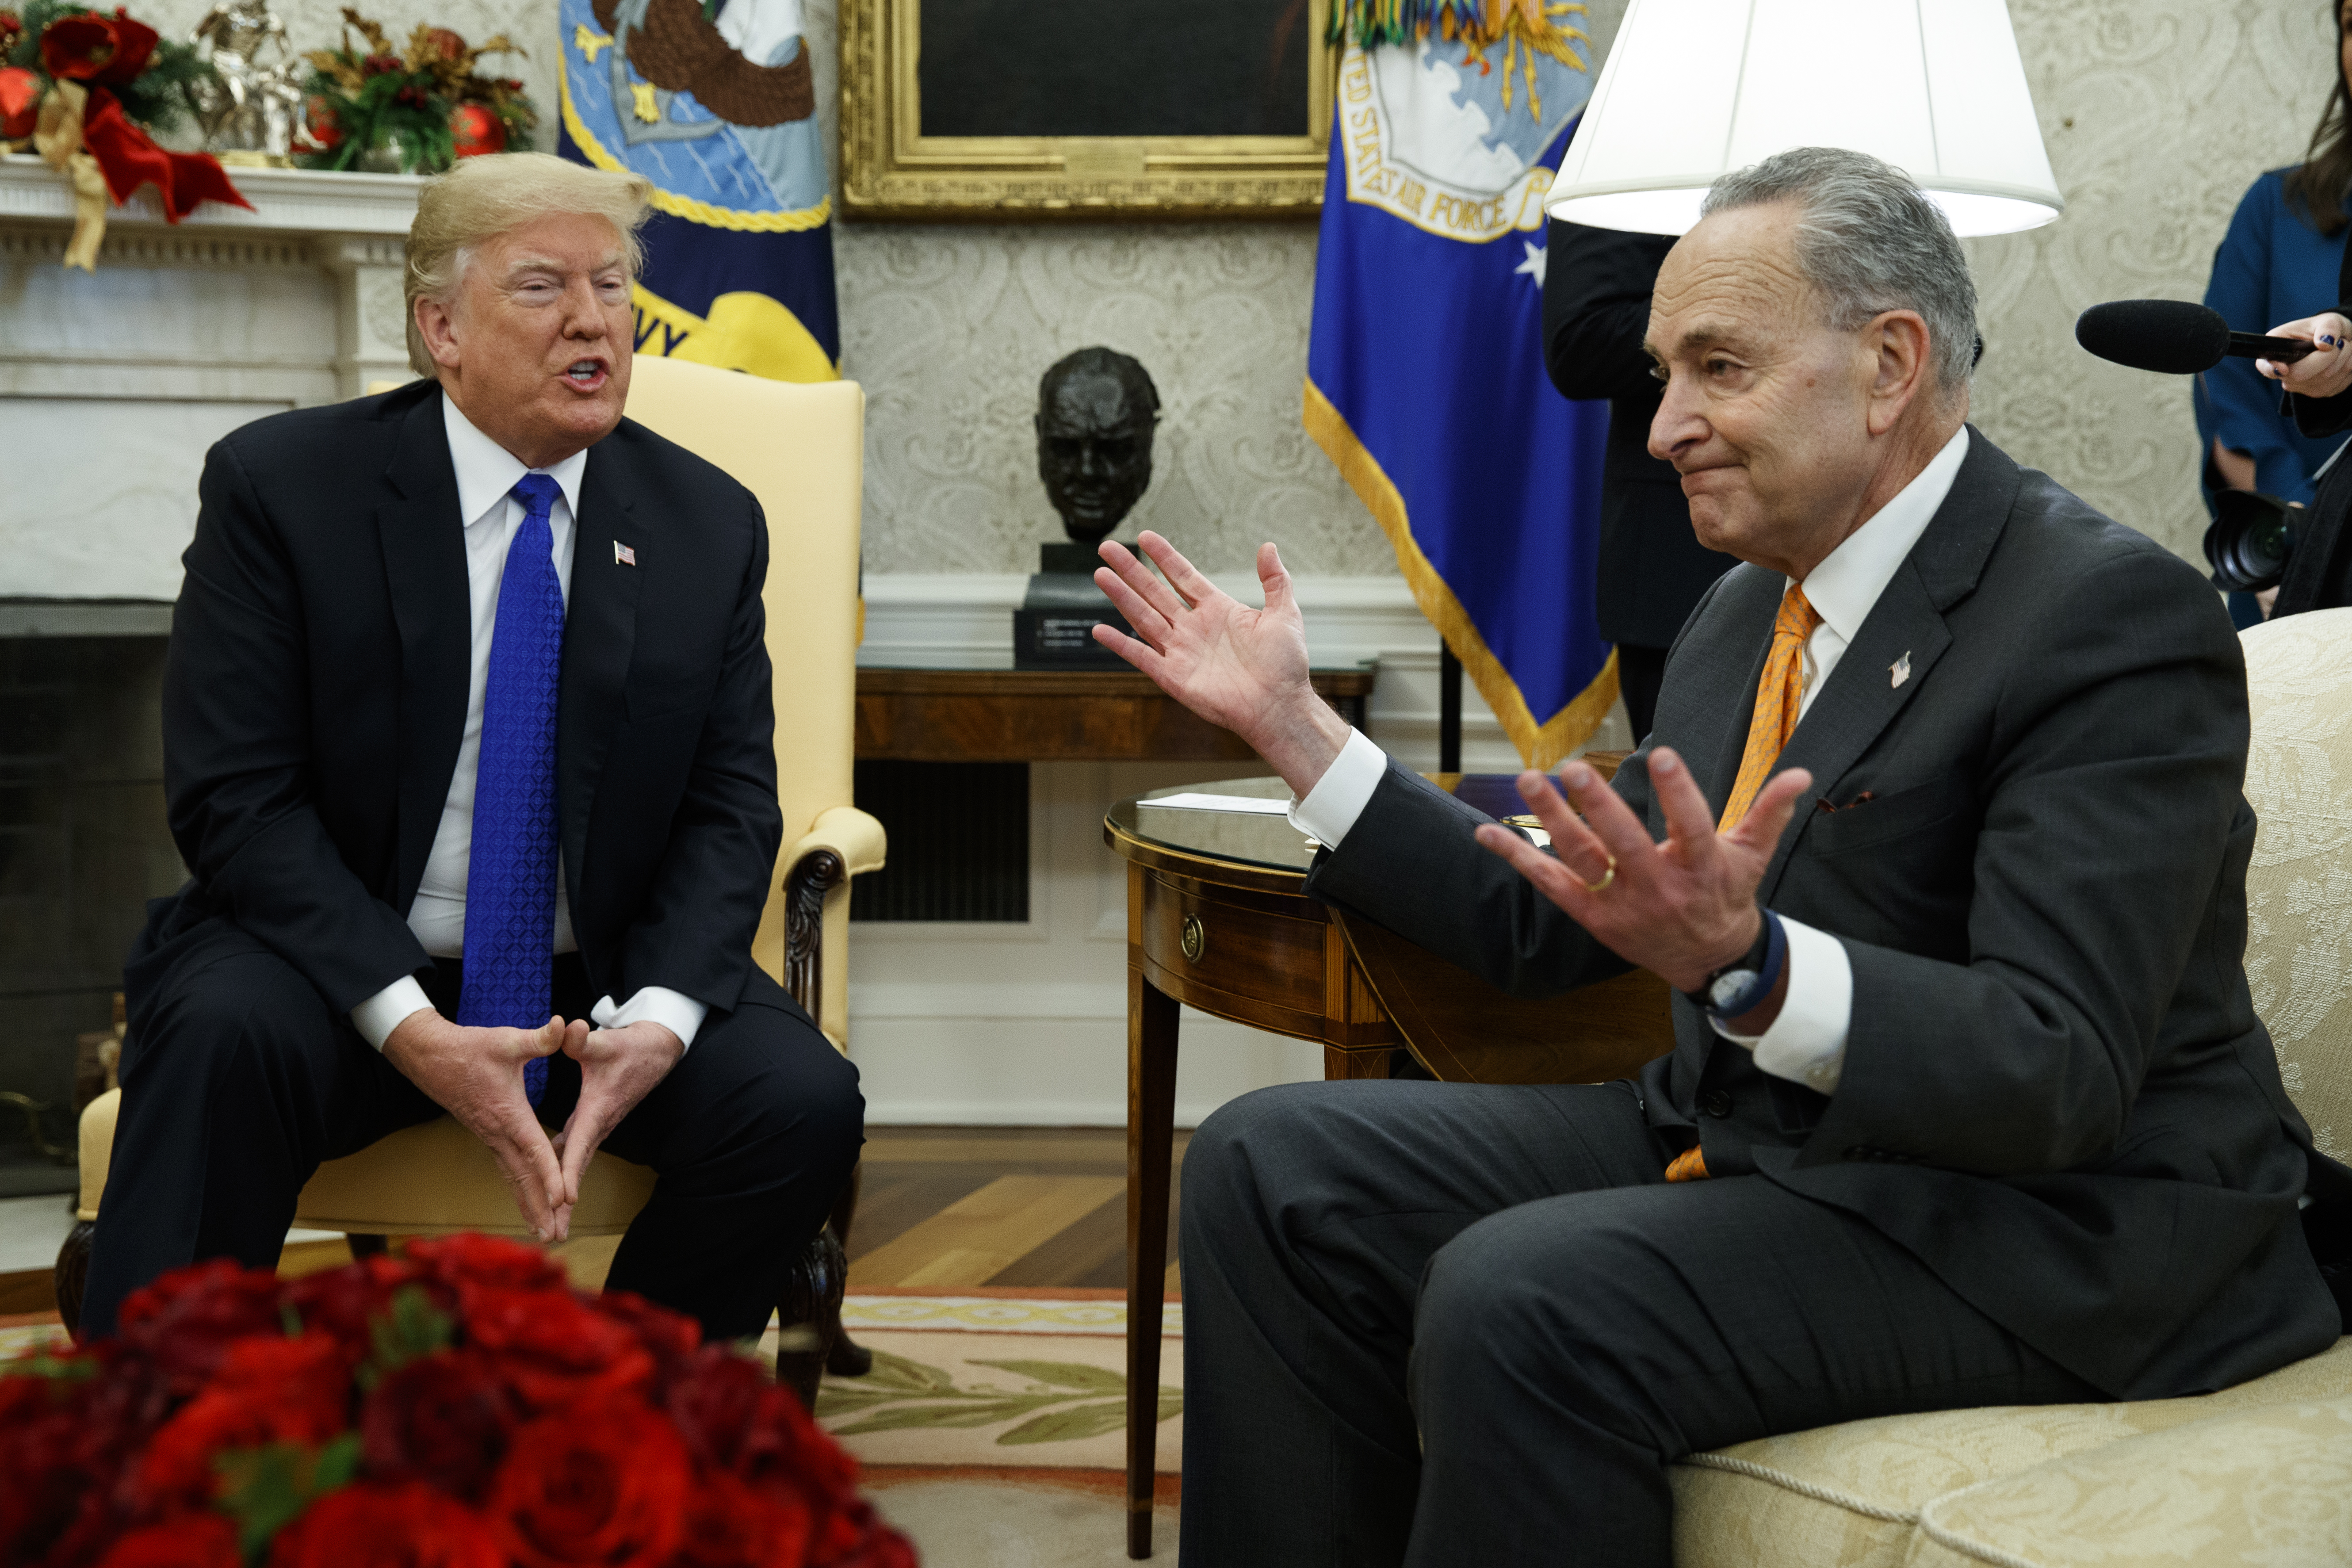 President Donald Trump talks with Senate Minority Leader Chuck Schumer, D-N.Y., during a meeting in the Oval Office of the White House